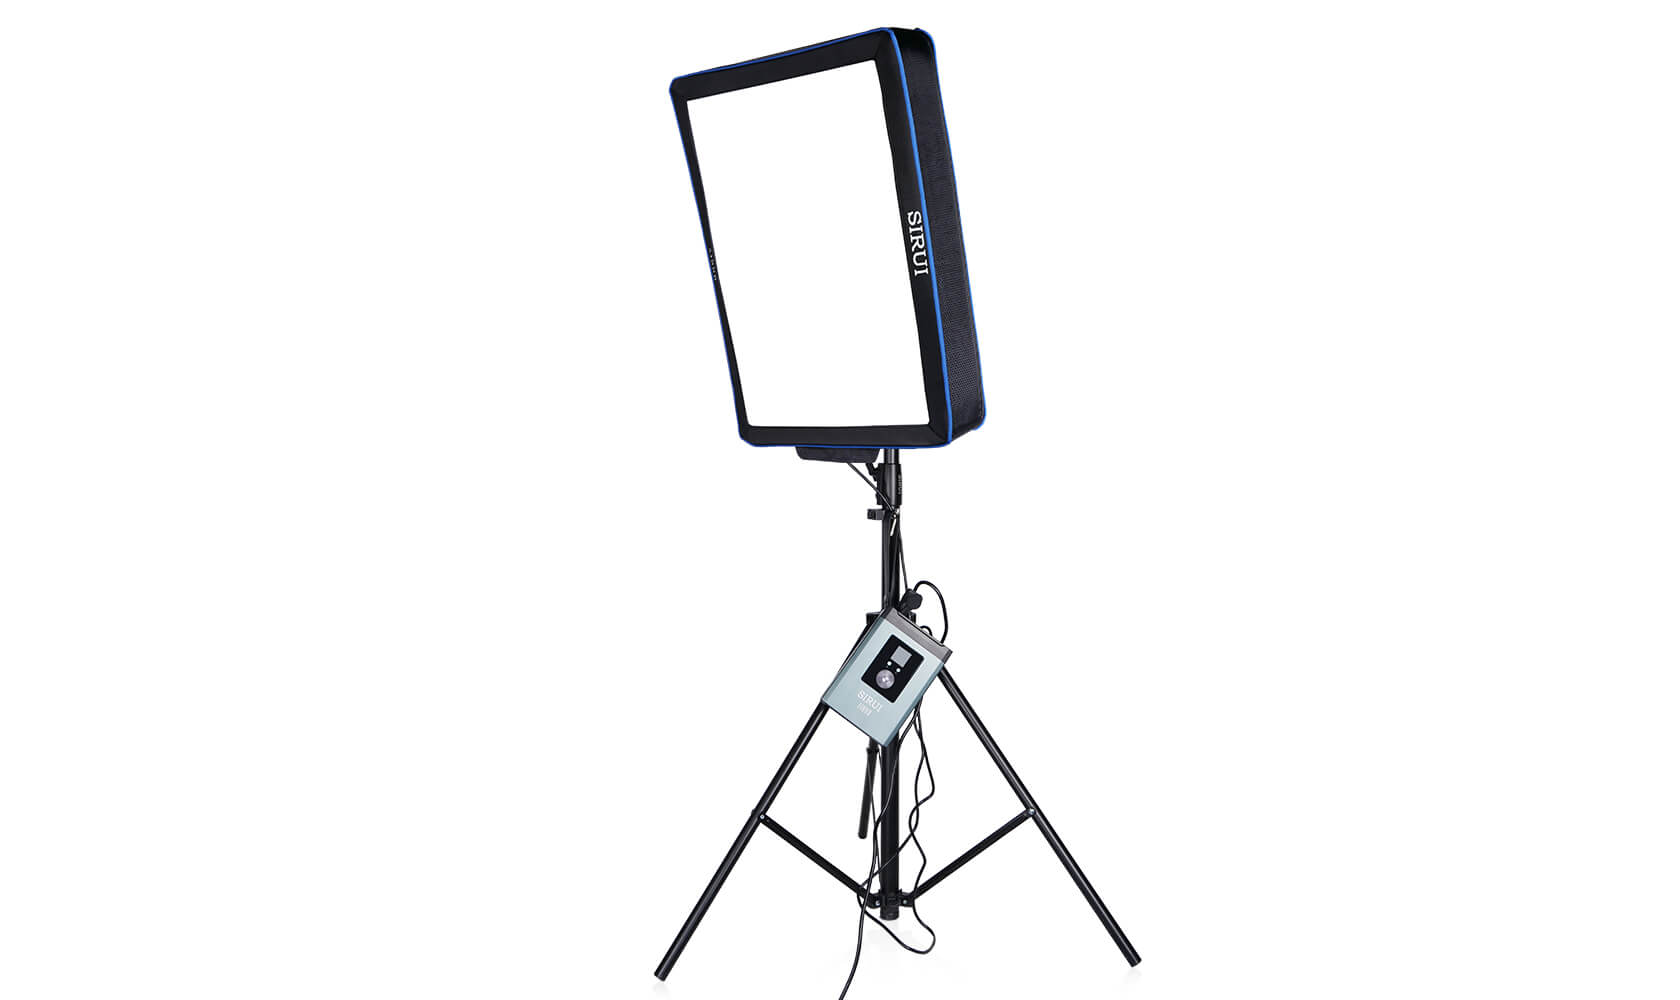 Sirui A100B Bi-Color Automatic Inflatable Photography Light Auto-Inflate Light+ Grid / Free Stand (Delivery Excluded)